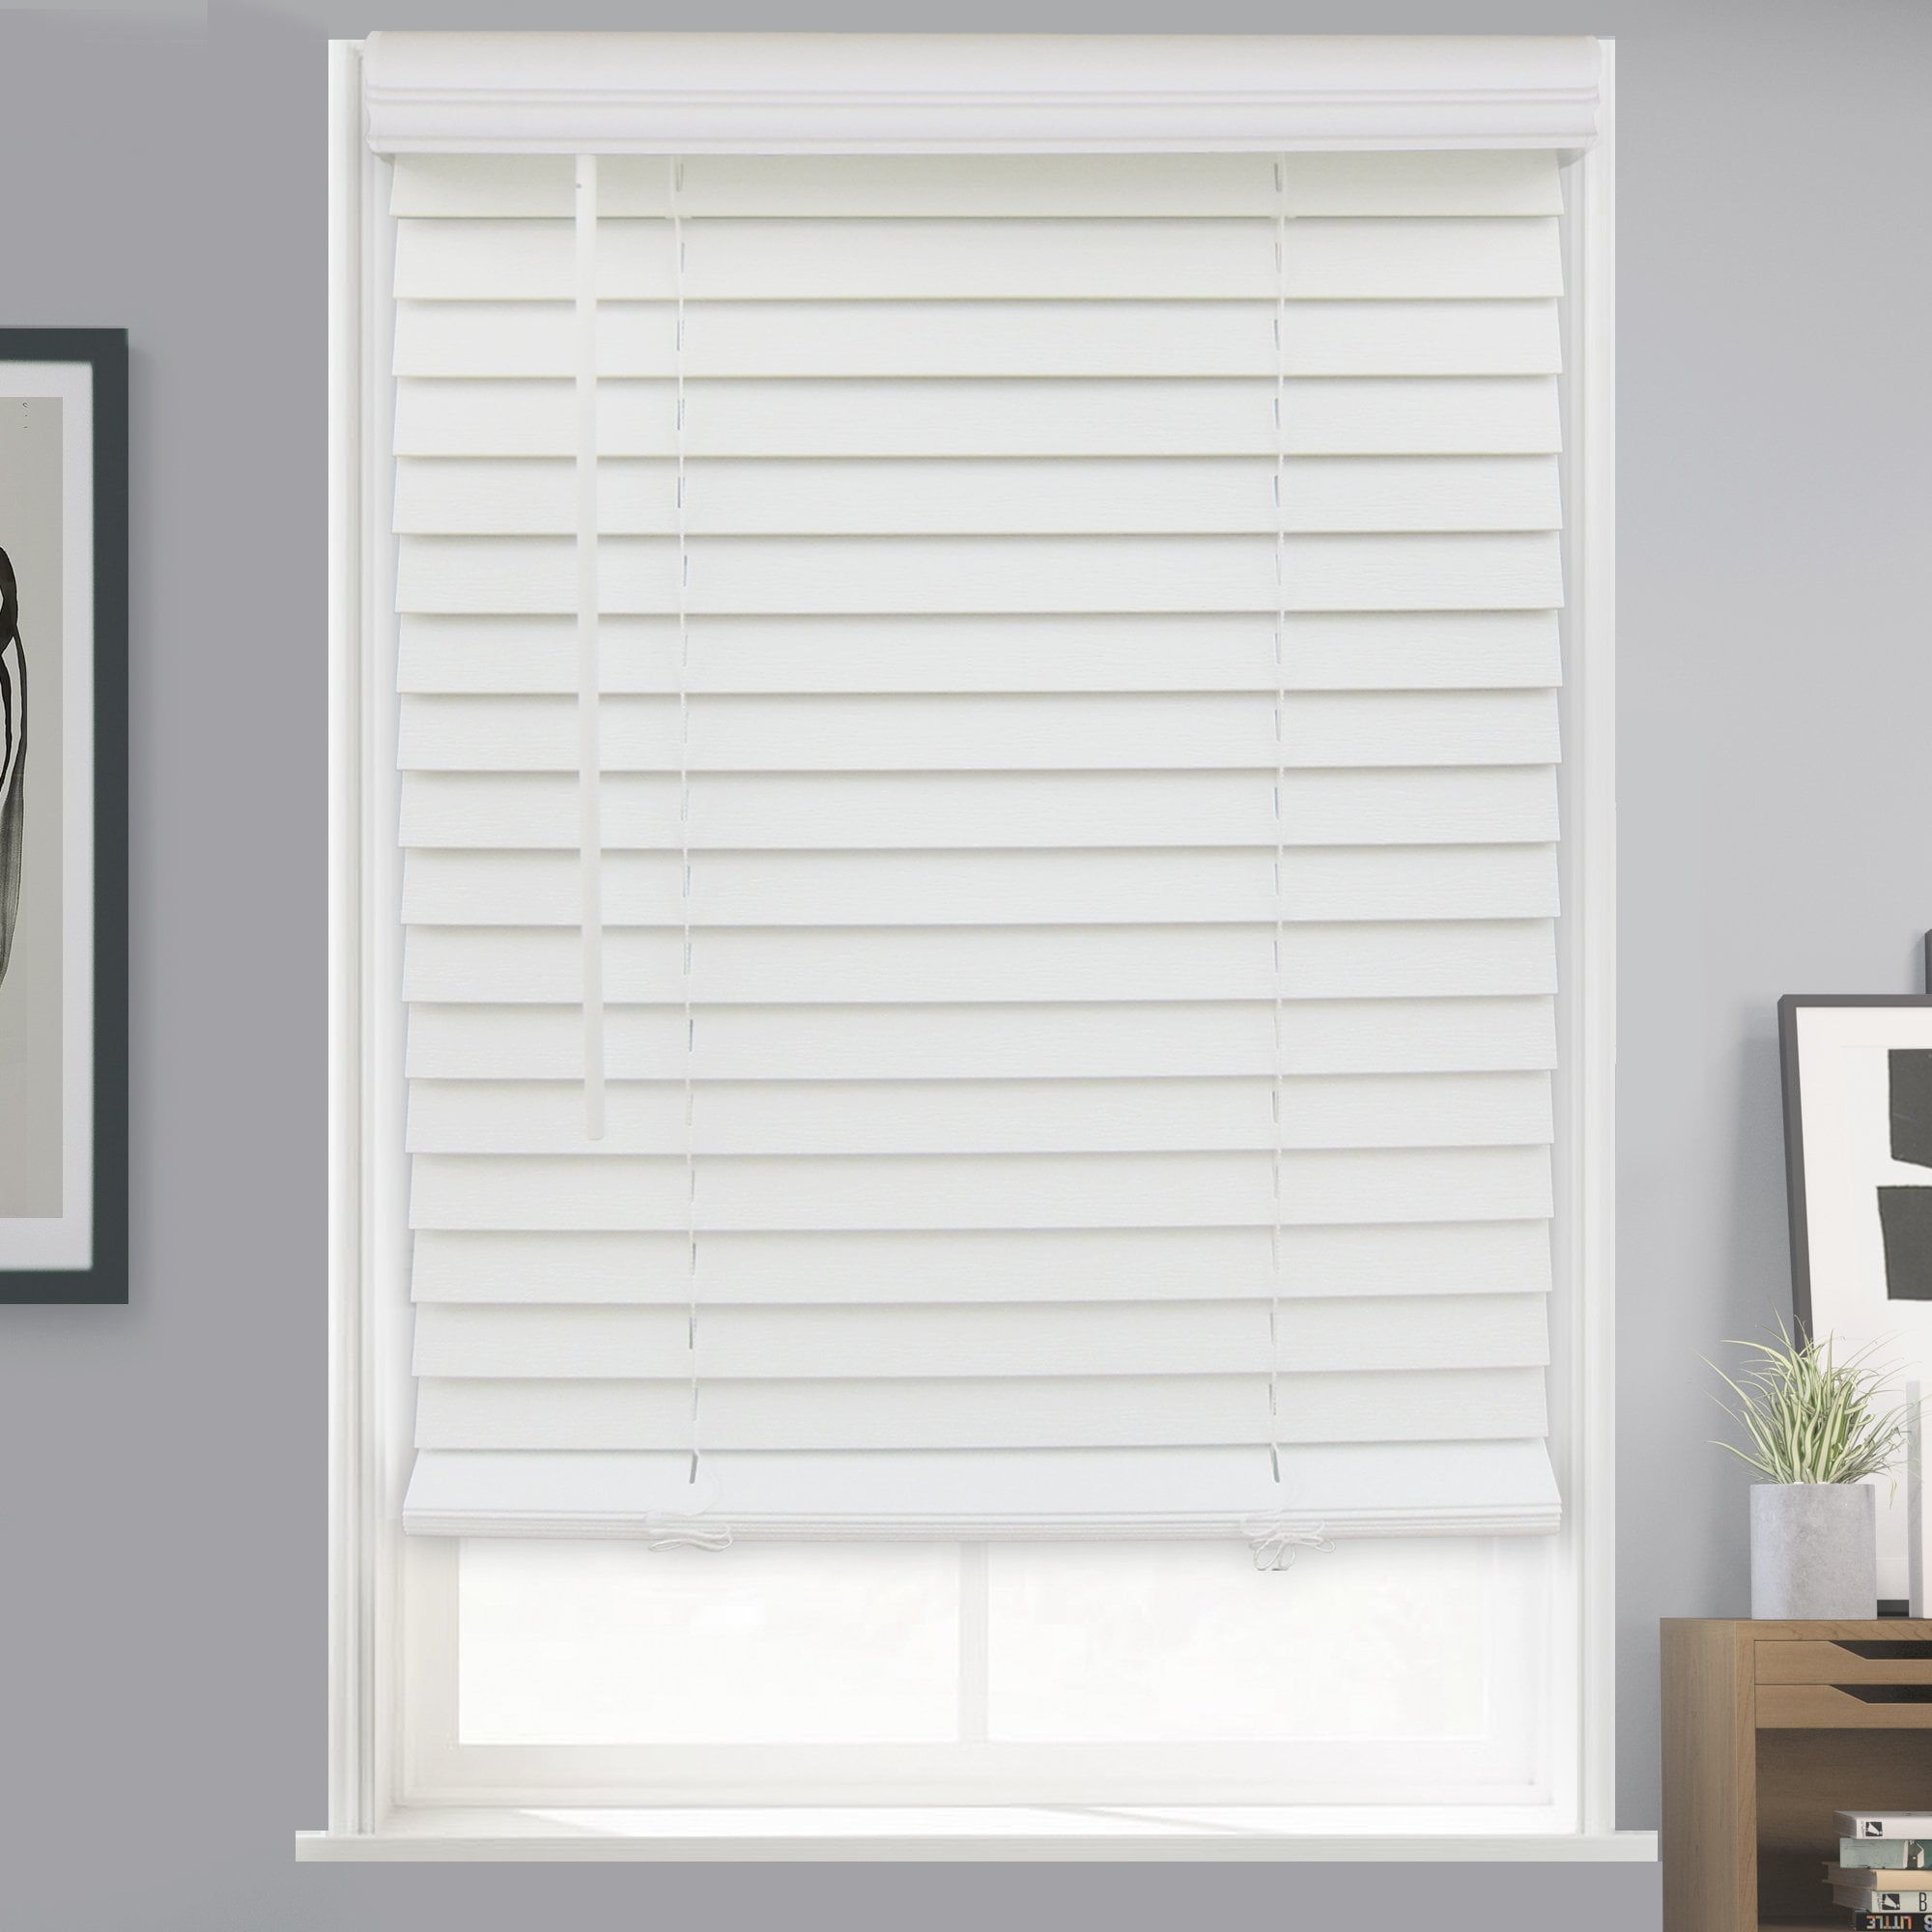 White Better Homes & Gardens 2-inch Cordless Faux Wood Blinds 34"W x 48"L New 